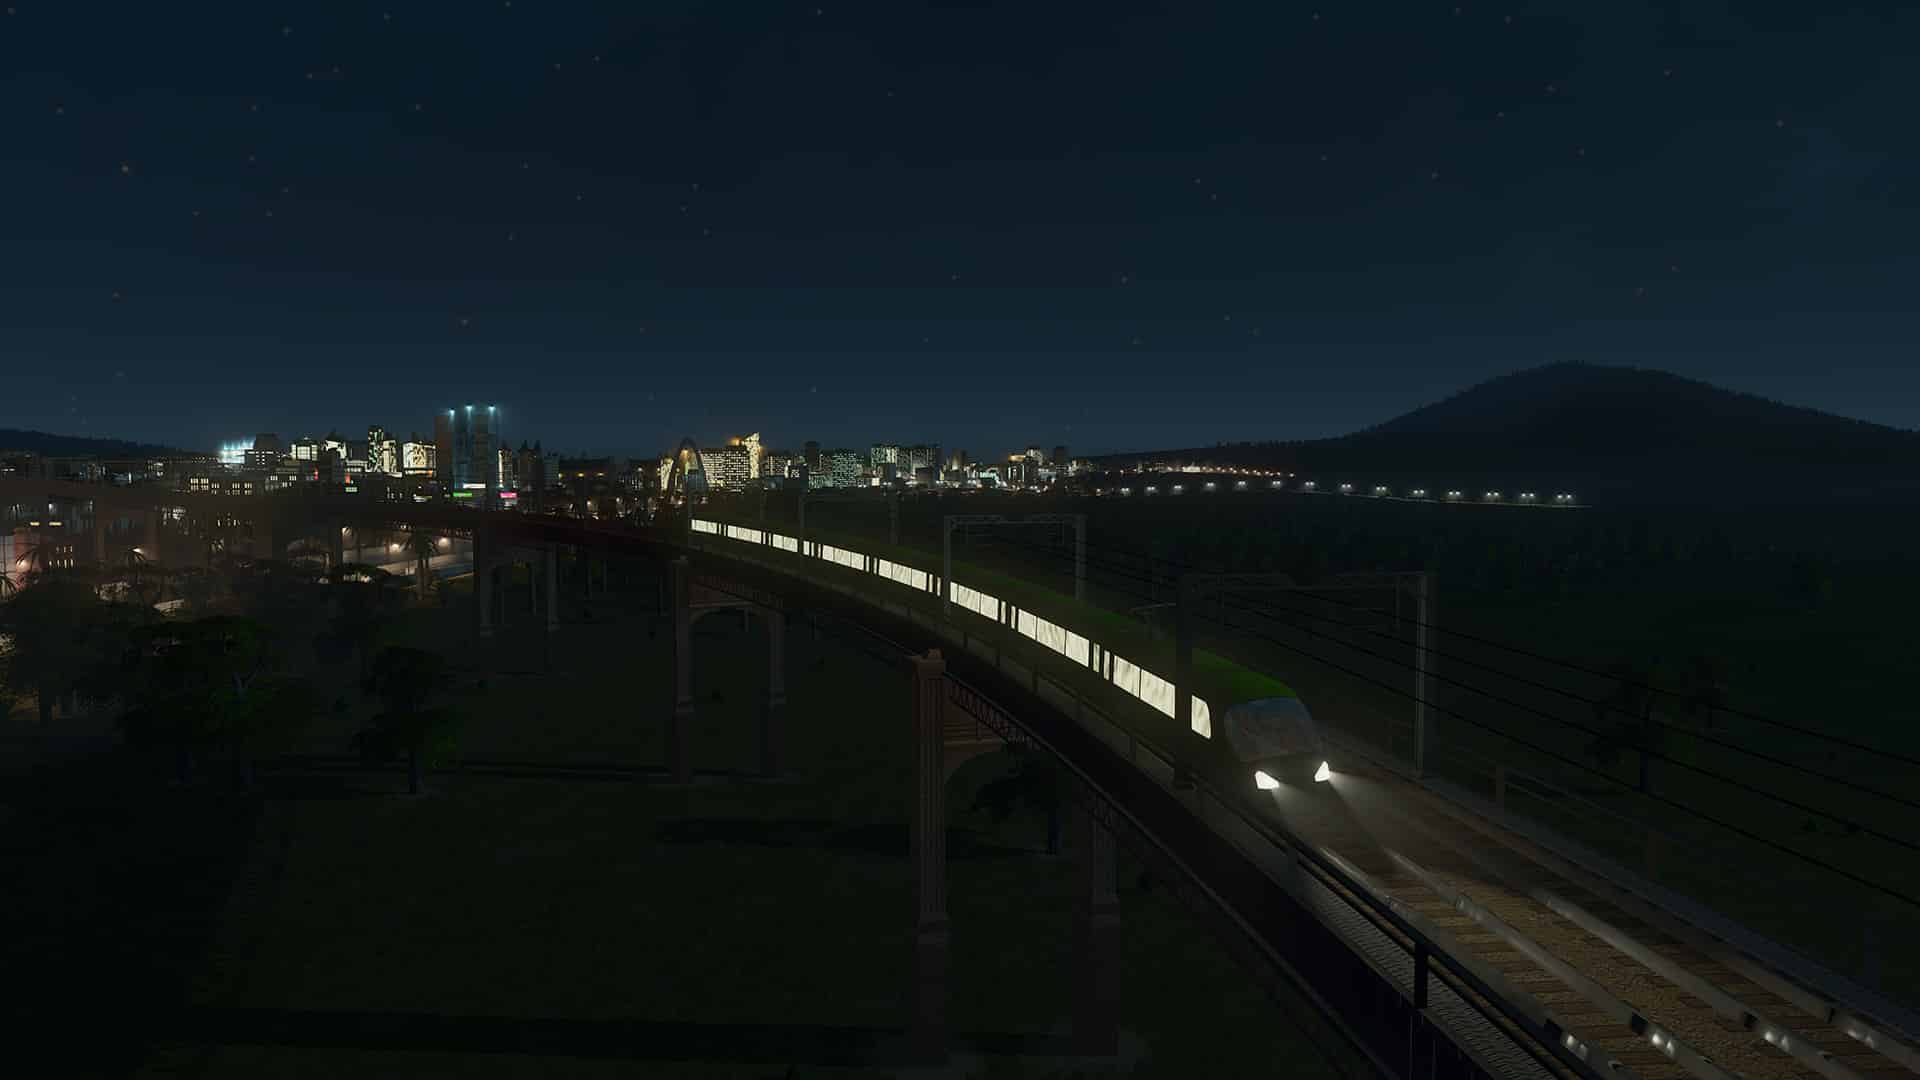 cities skyline city at night with monorail